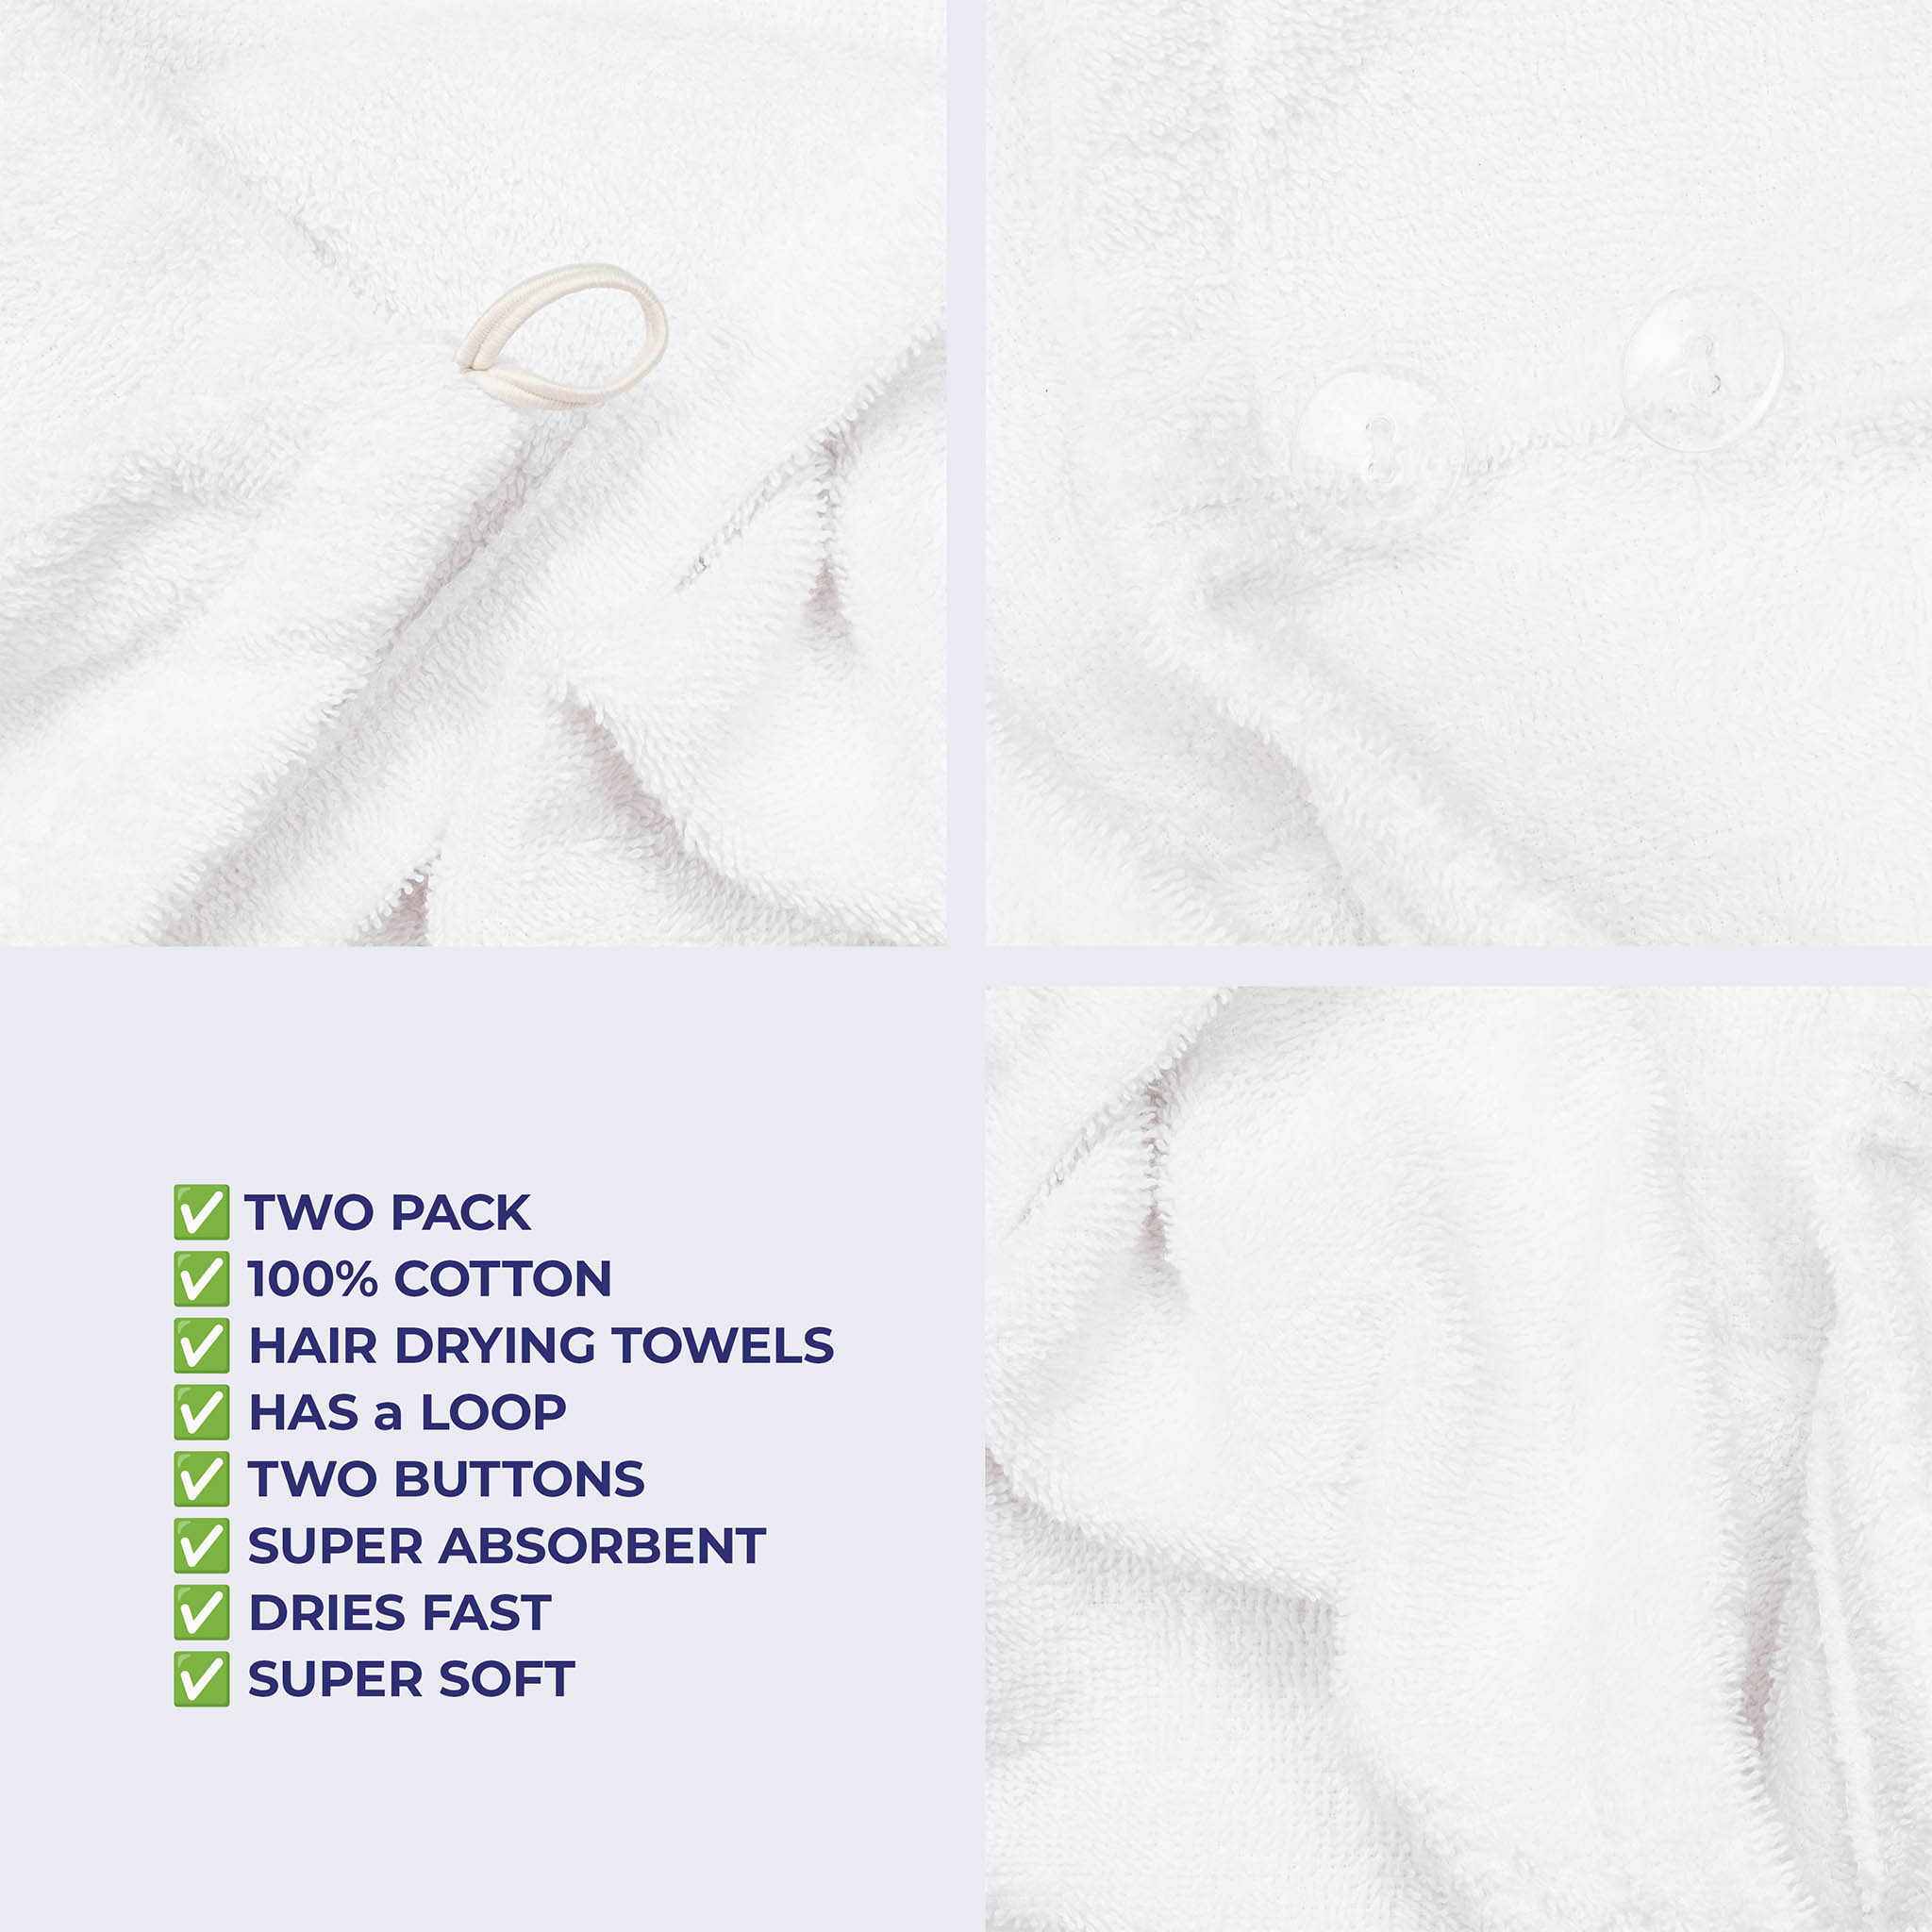 American Soft Linen 100% Cotton Hair Drying Towels for Women 2 pack 75 set case pack white-5